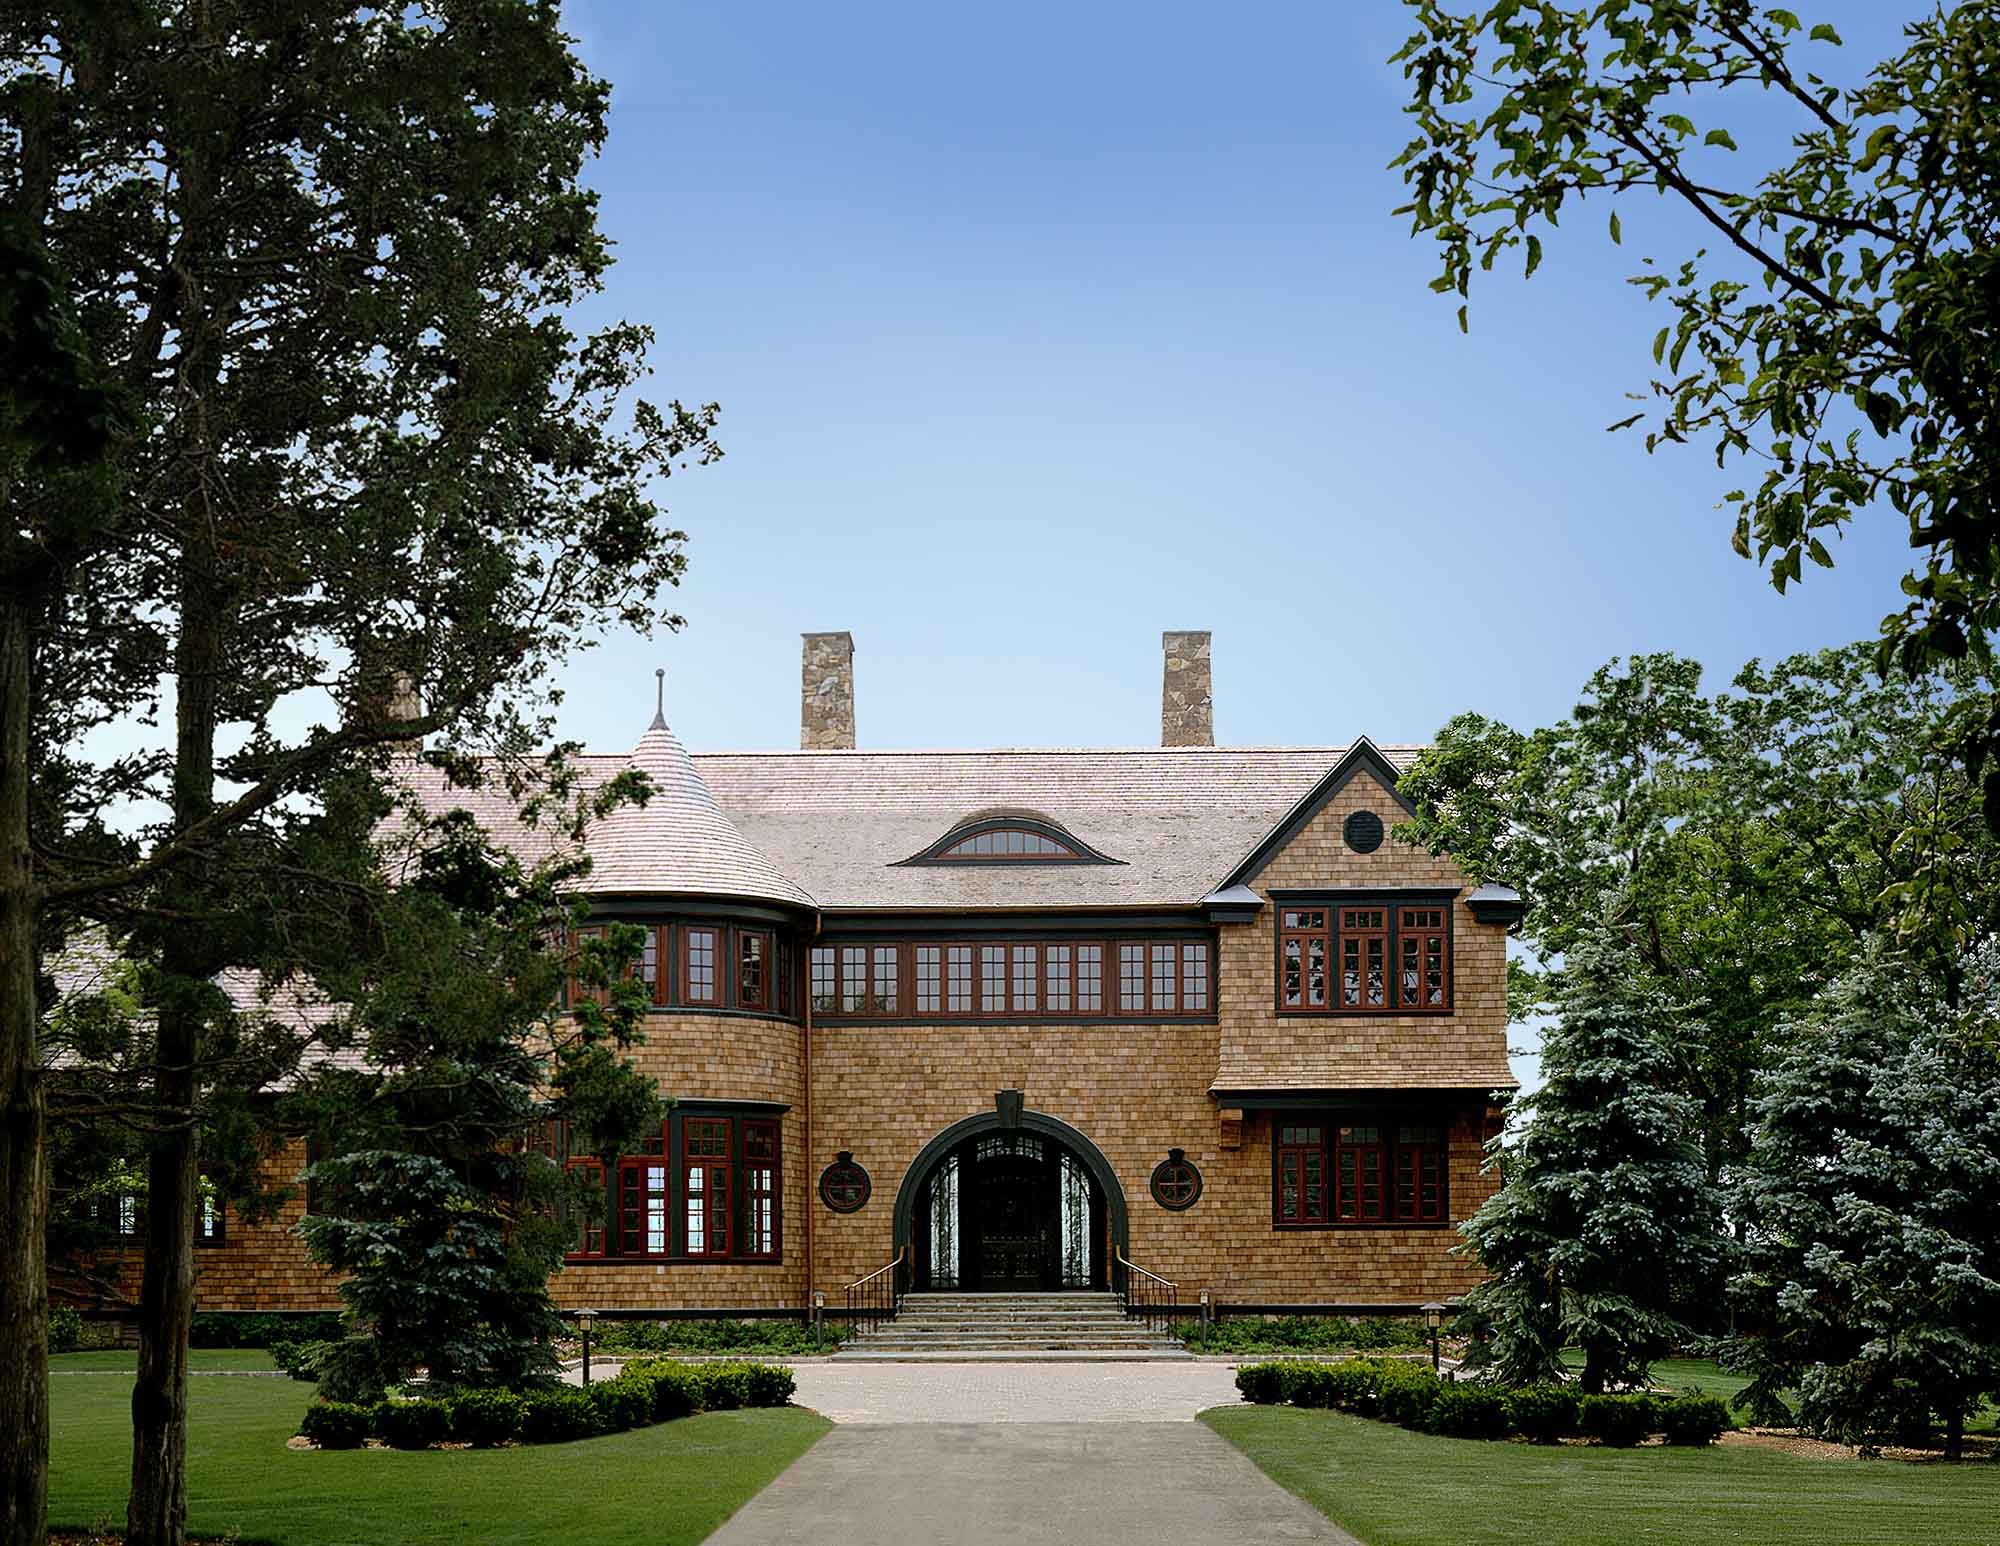 Exterior shingle style home, long island, brow dormer, arched entry, driveway, courtyard Asharoken